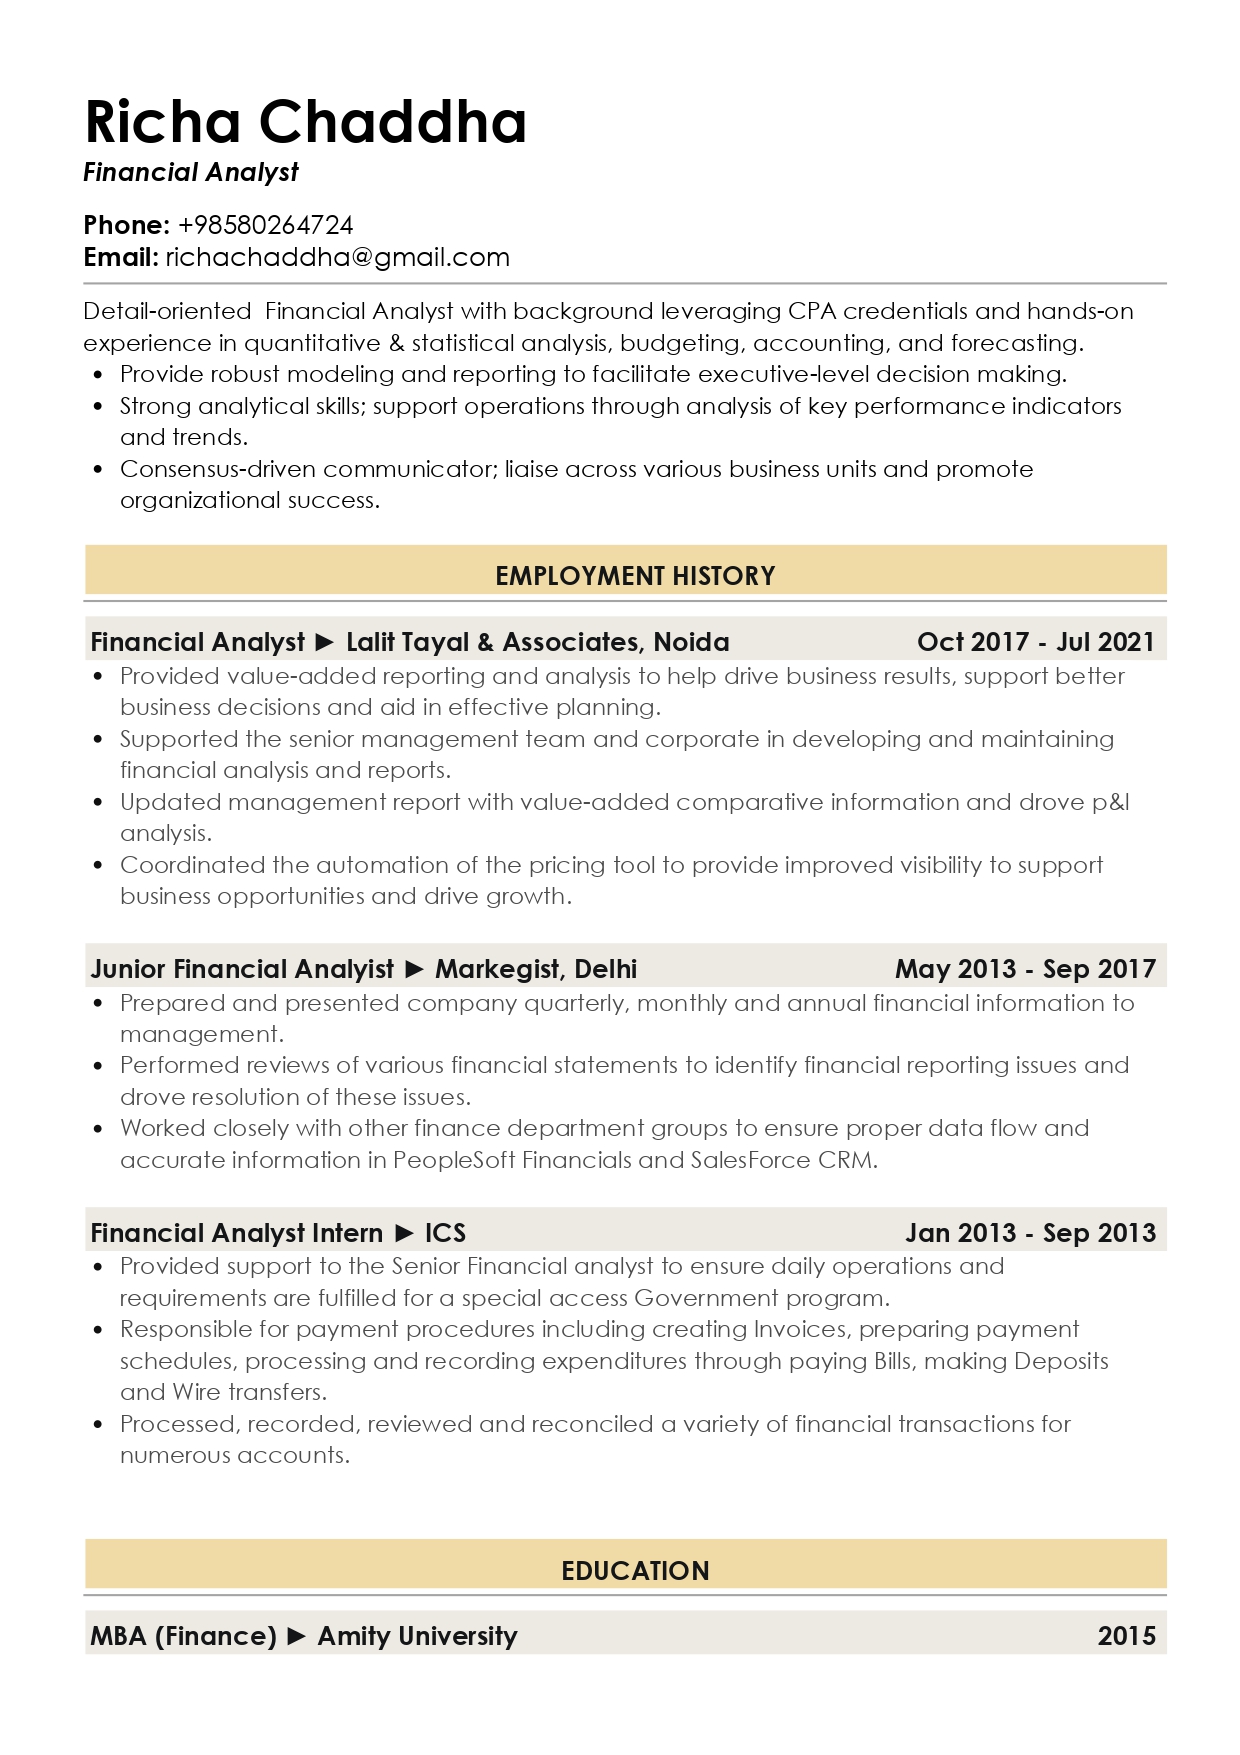 Sample Resume of Financial Analyst1 | Free Resume Templates & Samples on Resumod.co